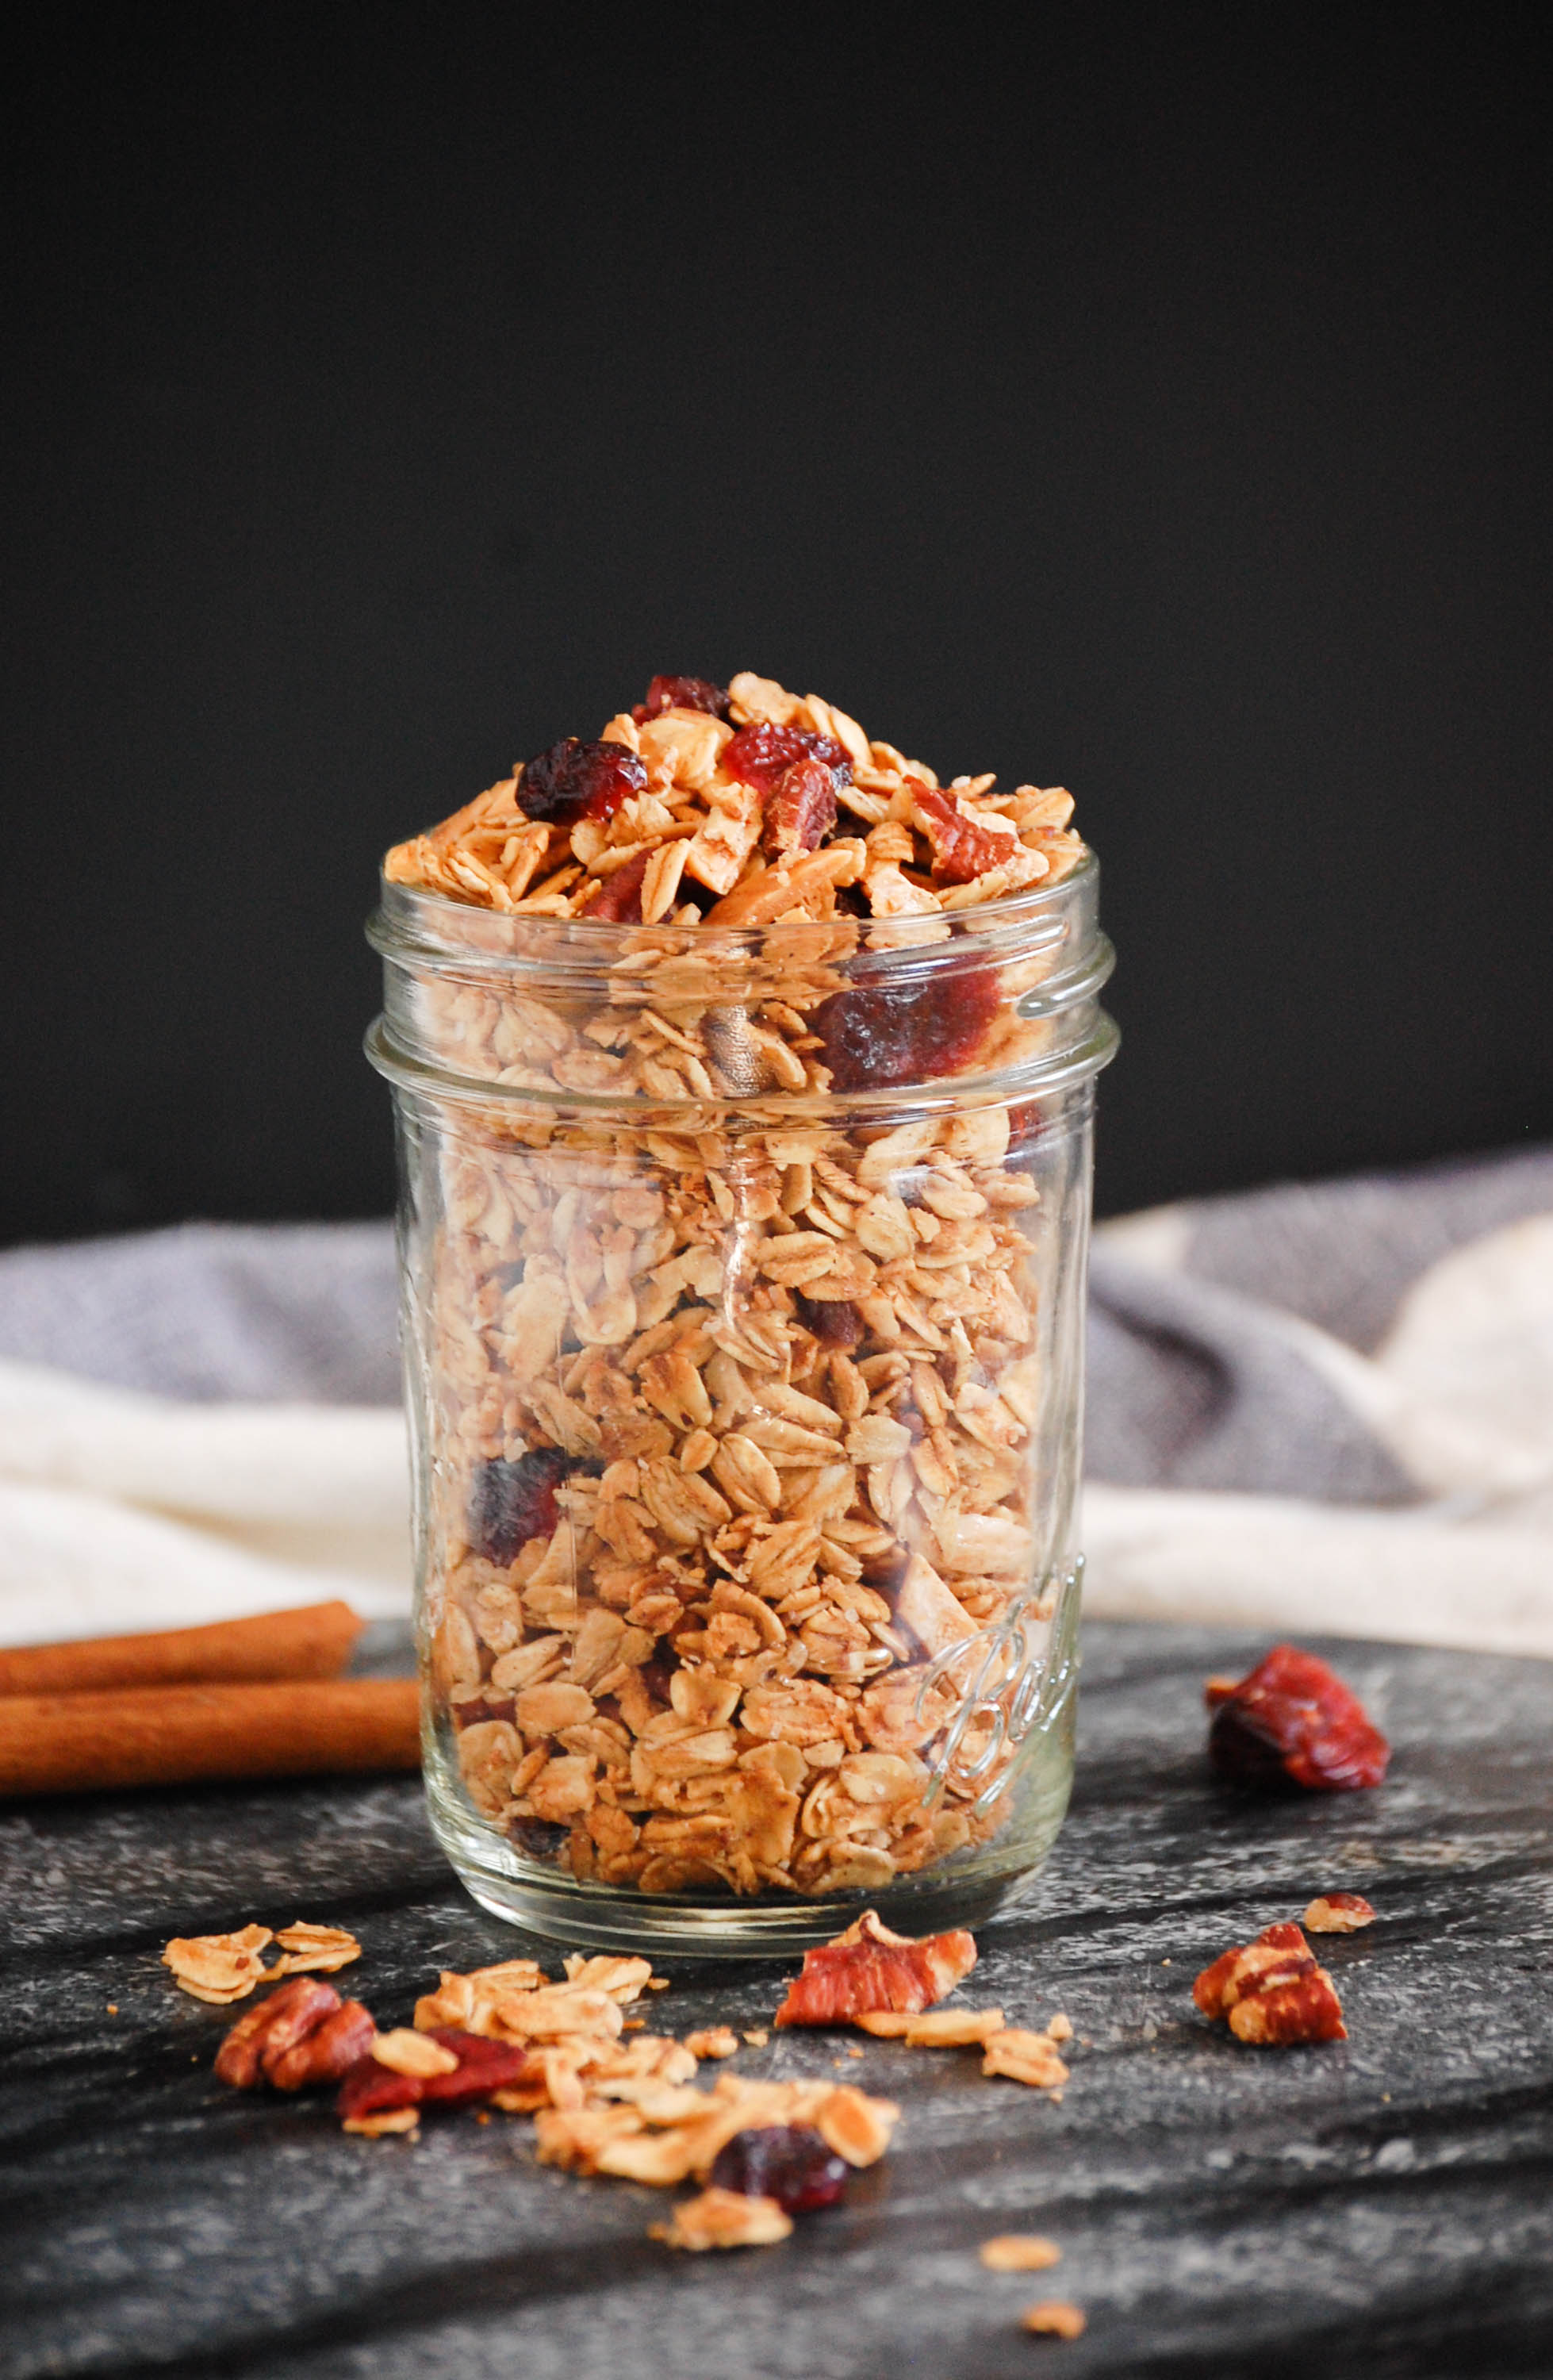 Homemade Maple Pecan Granola by The District Table